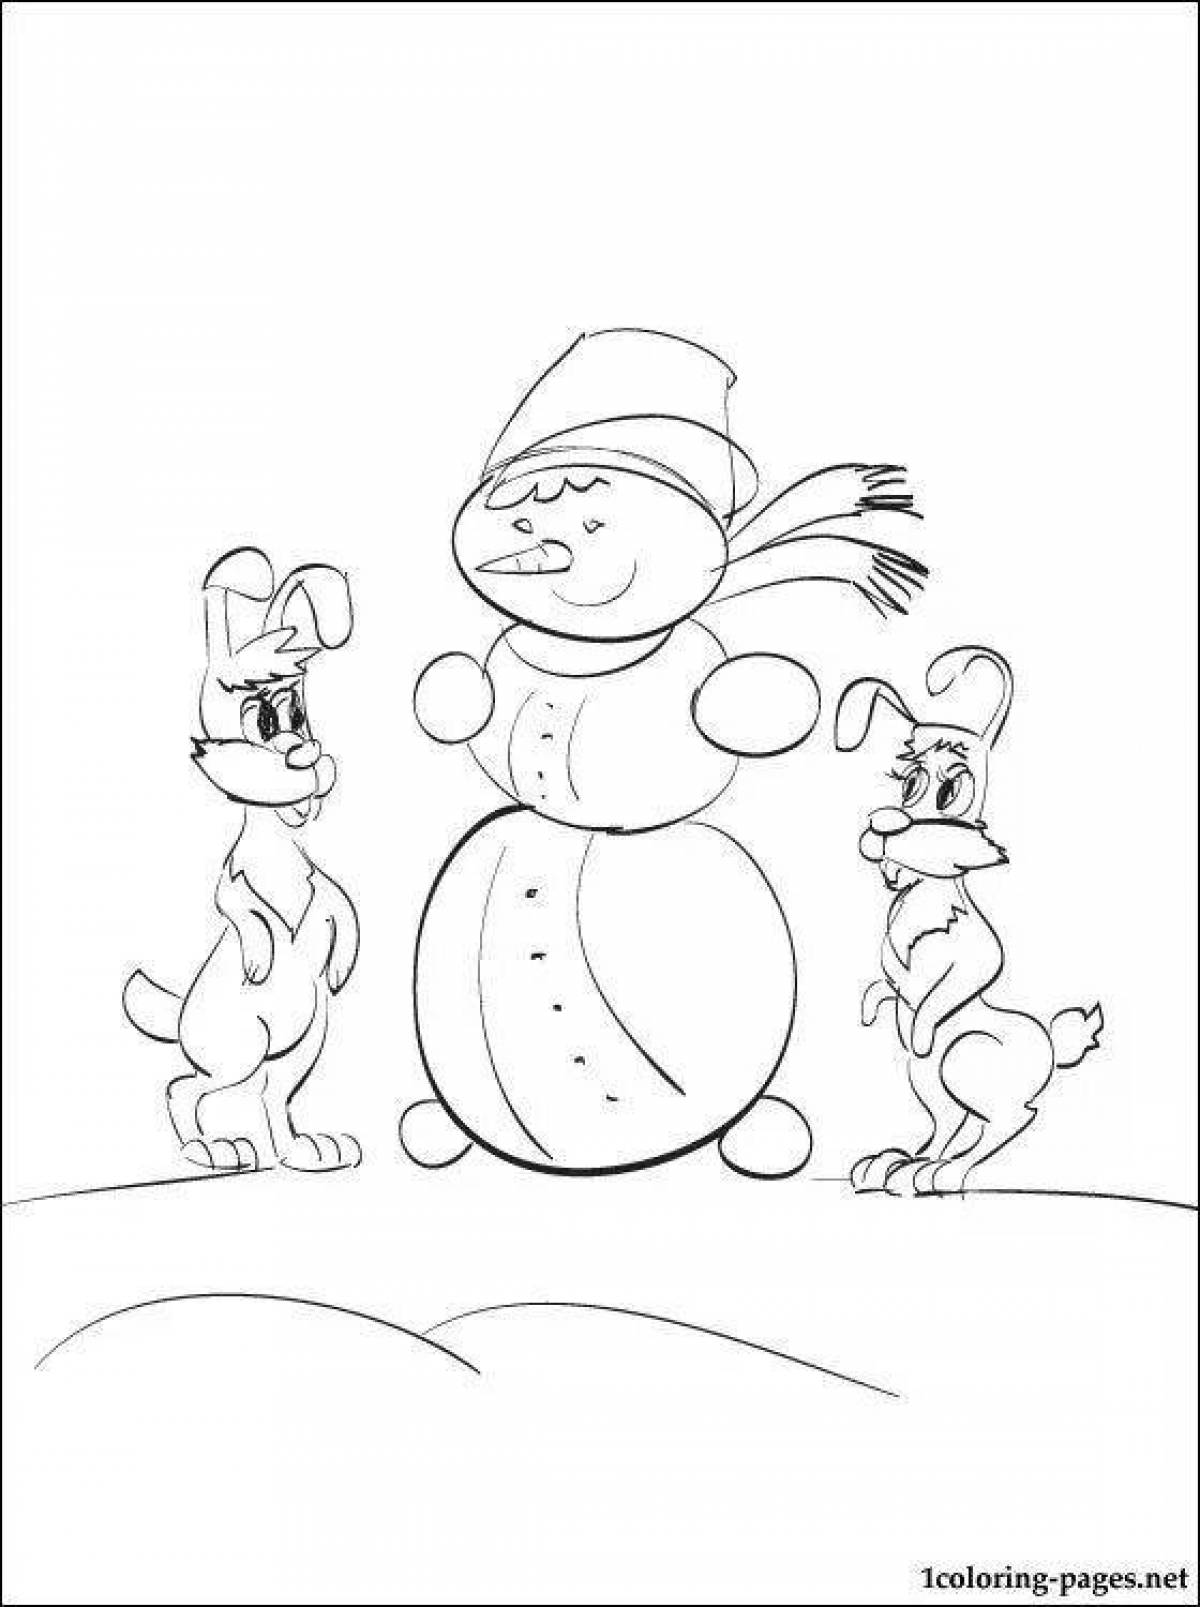 Coloring book colorful hare and snowman